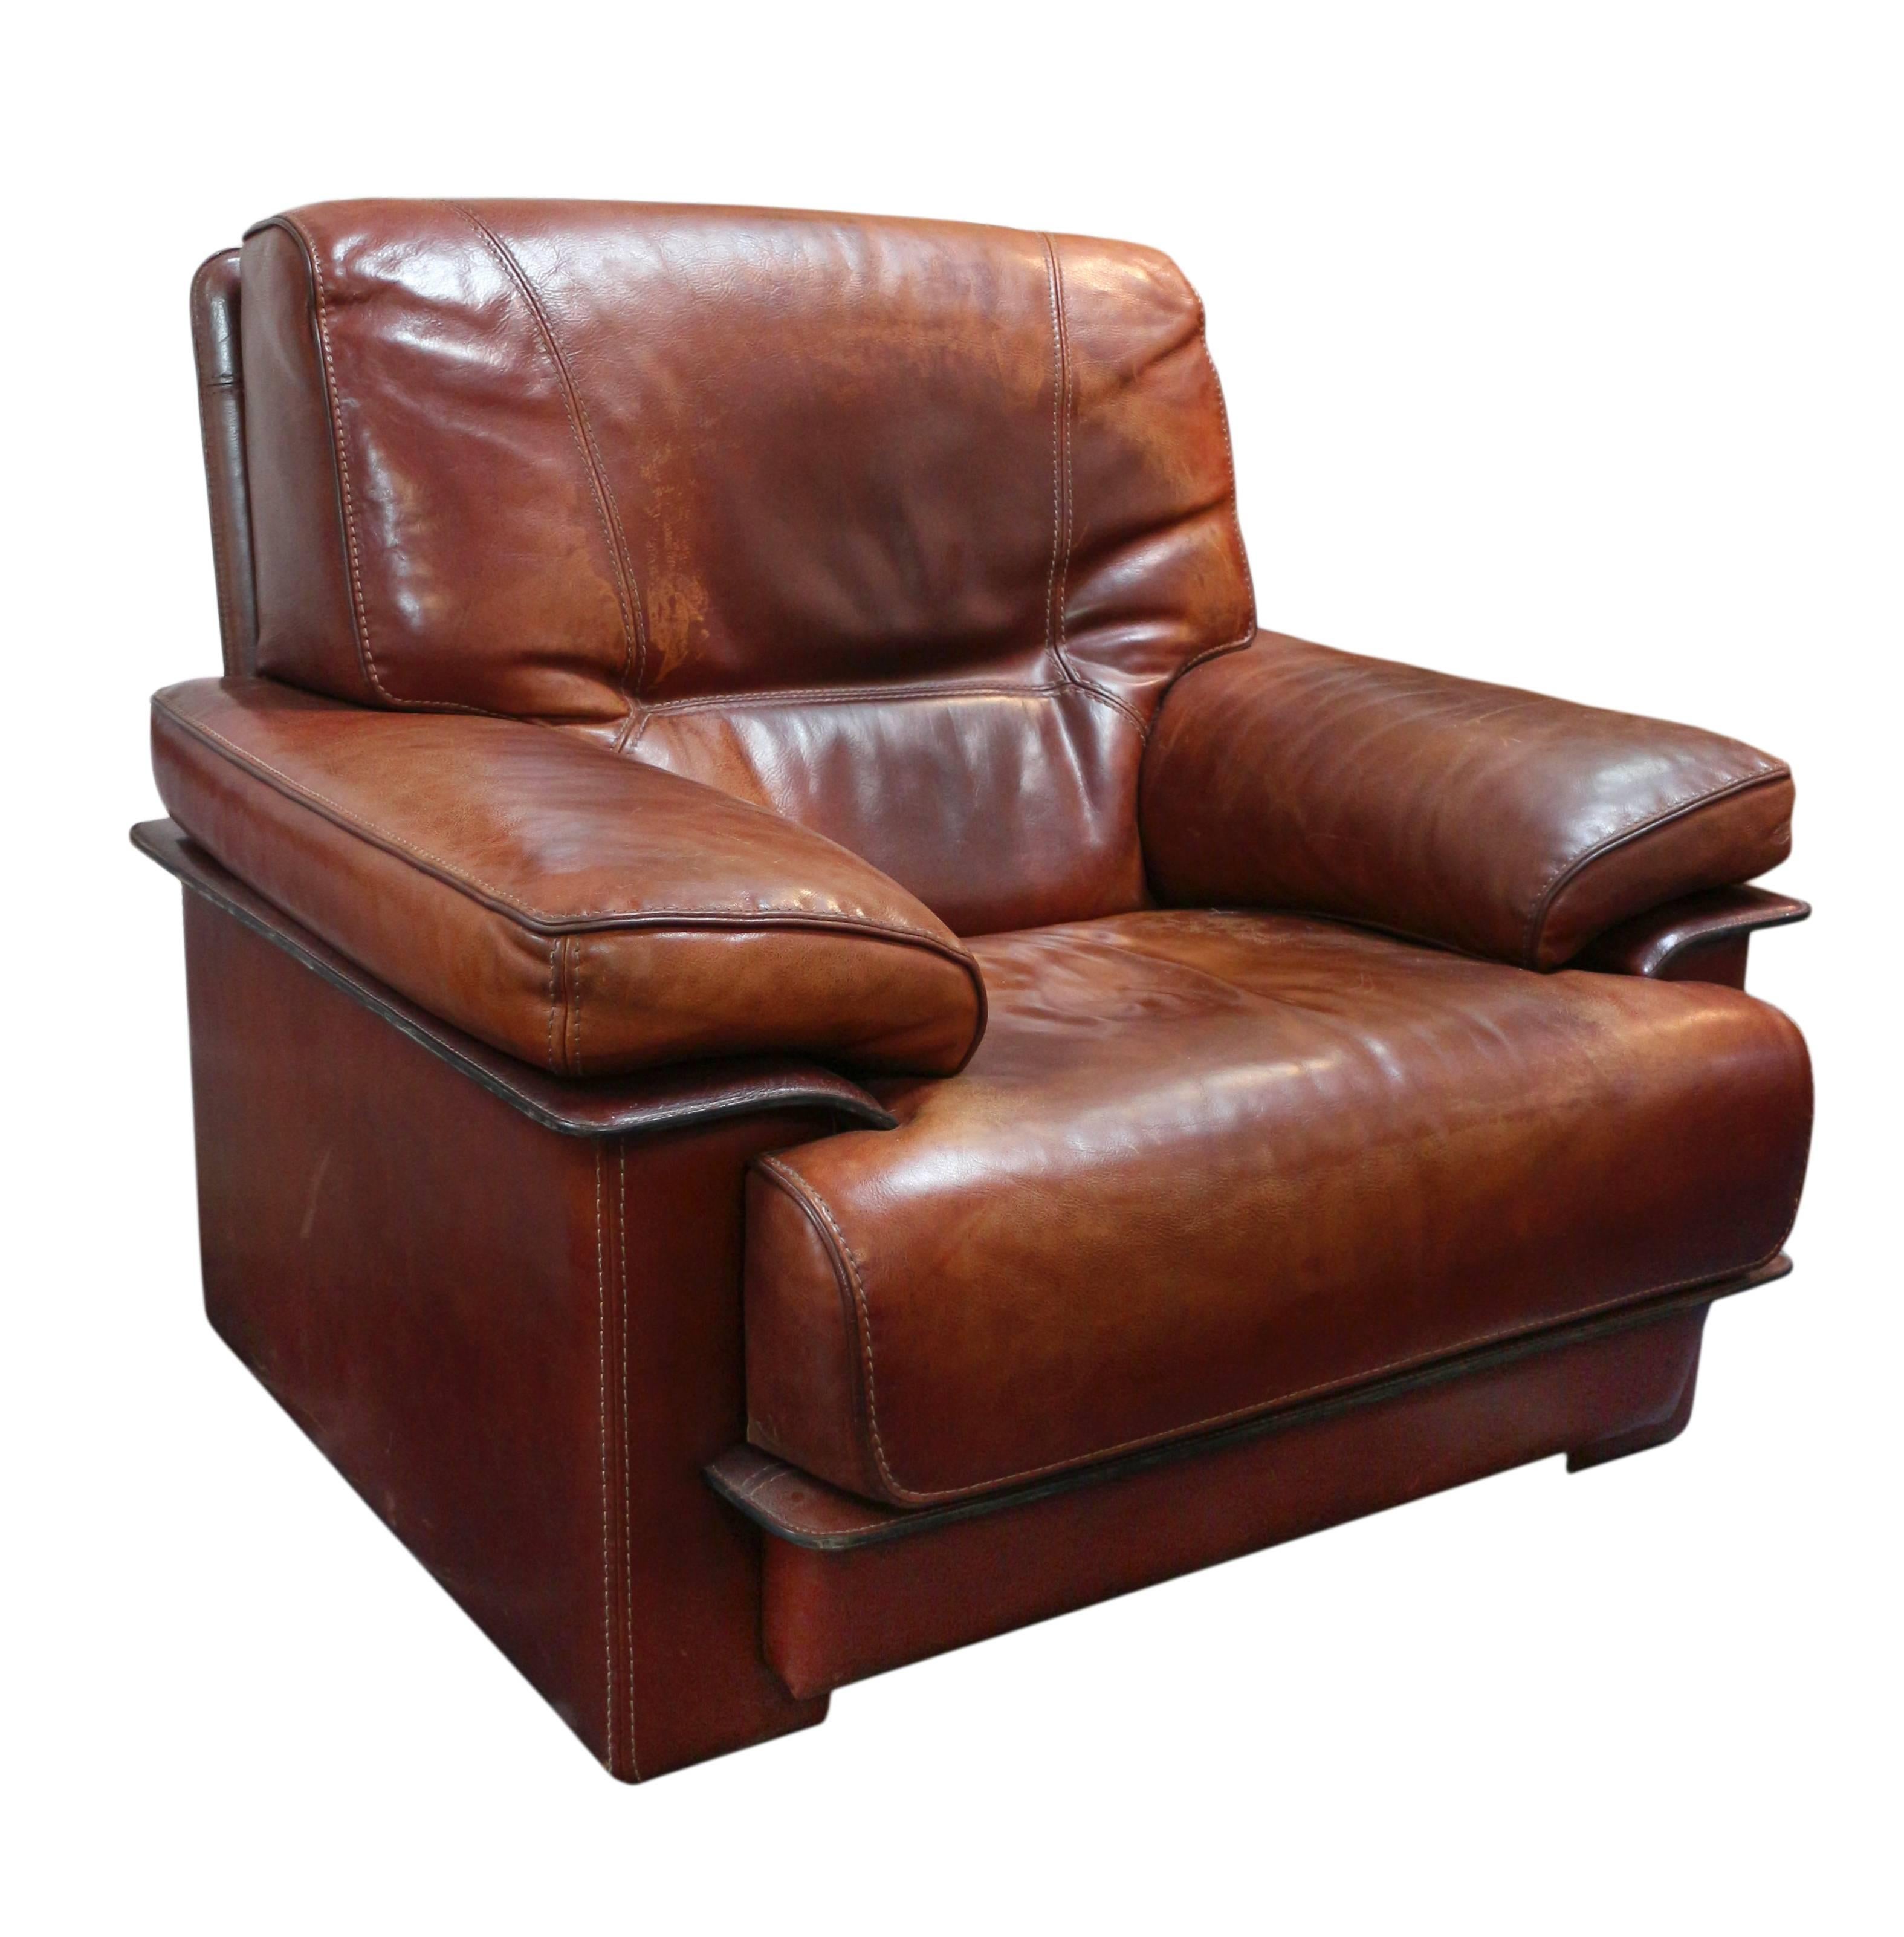 Pair of leather armchairs by Tierre.